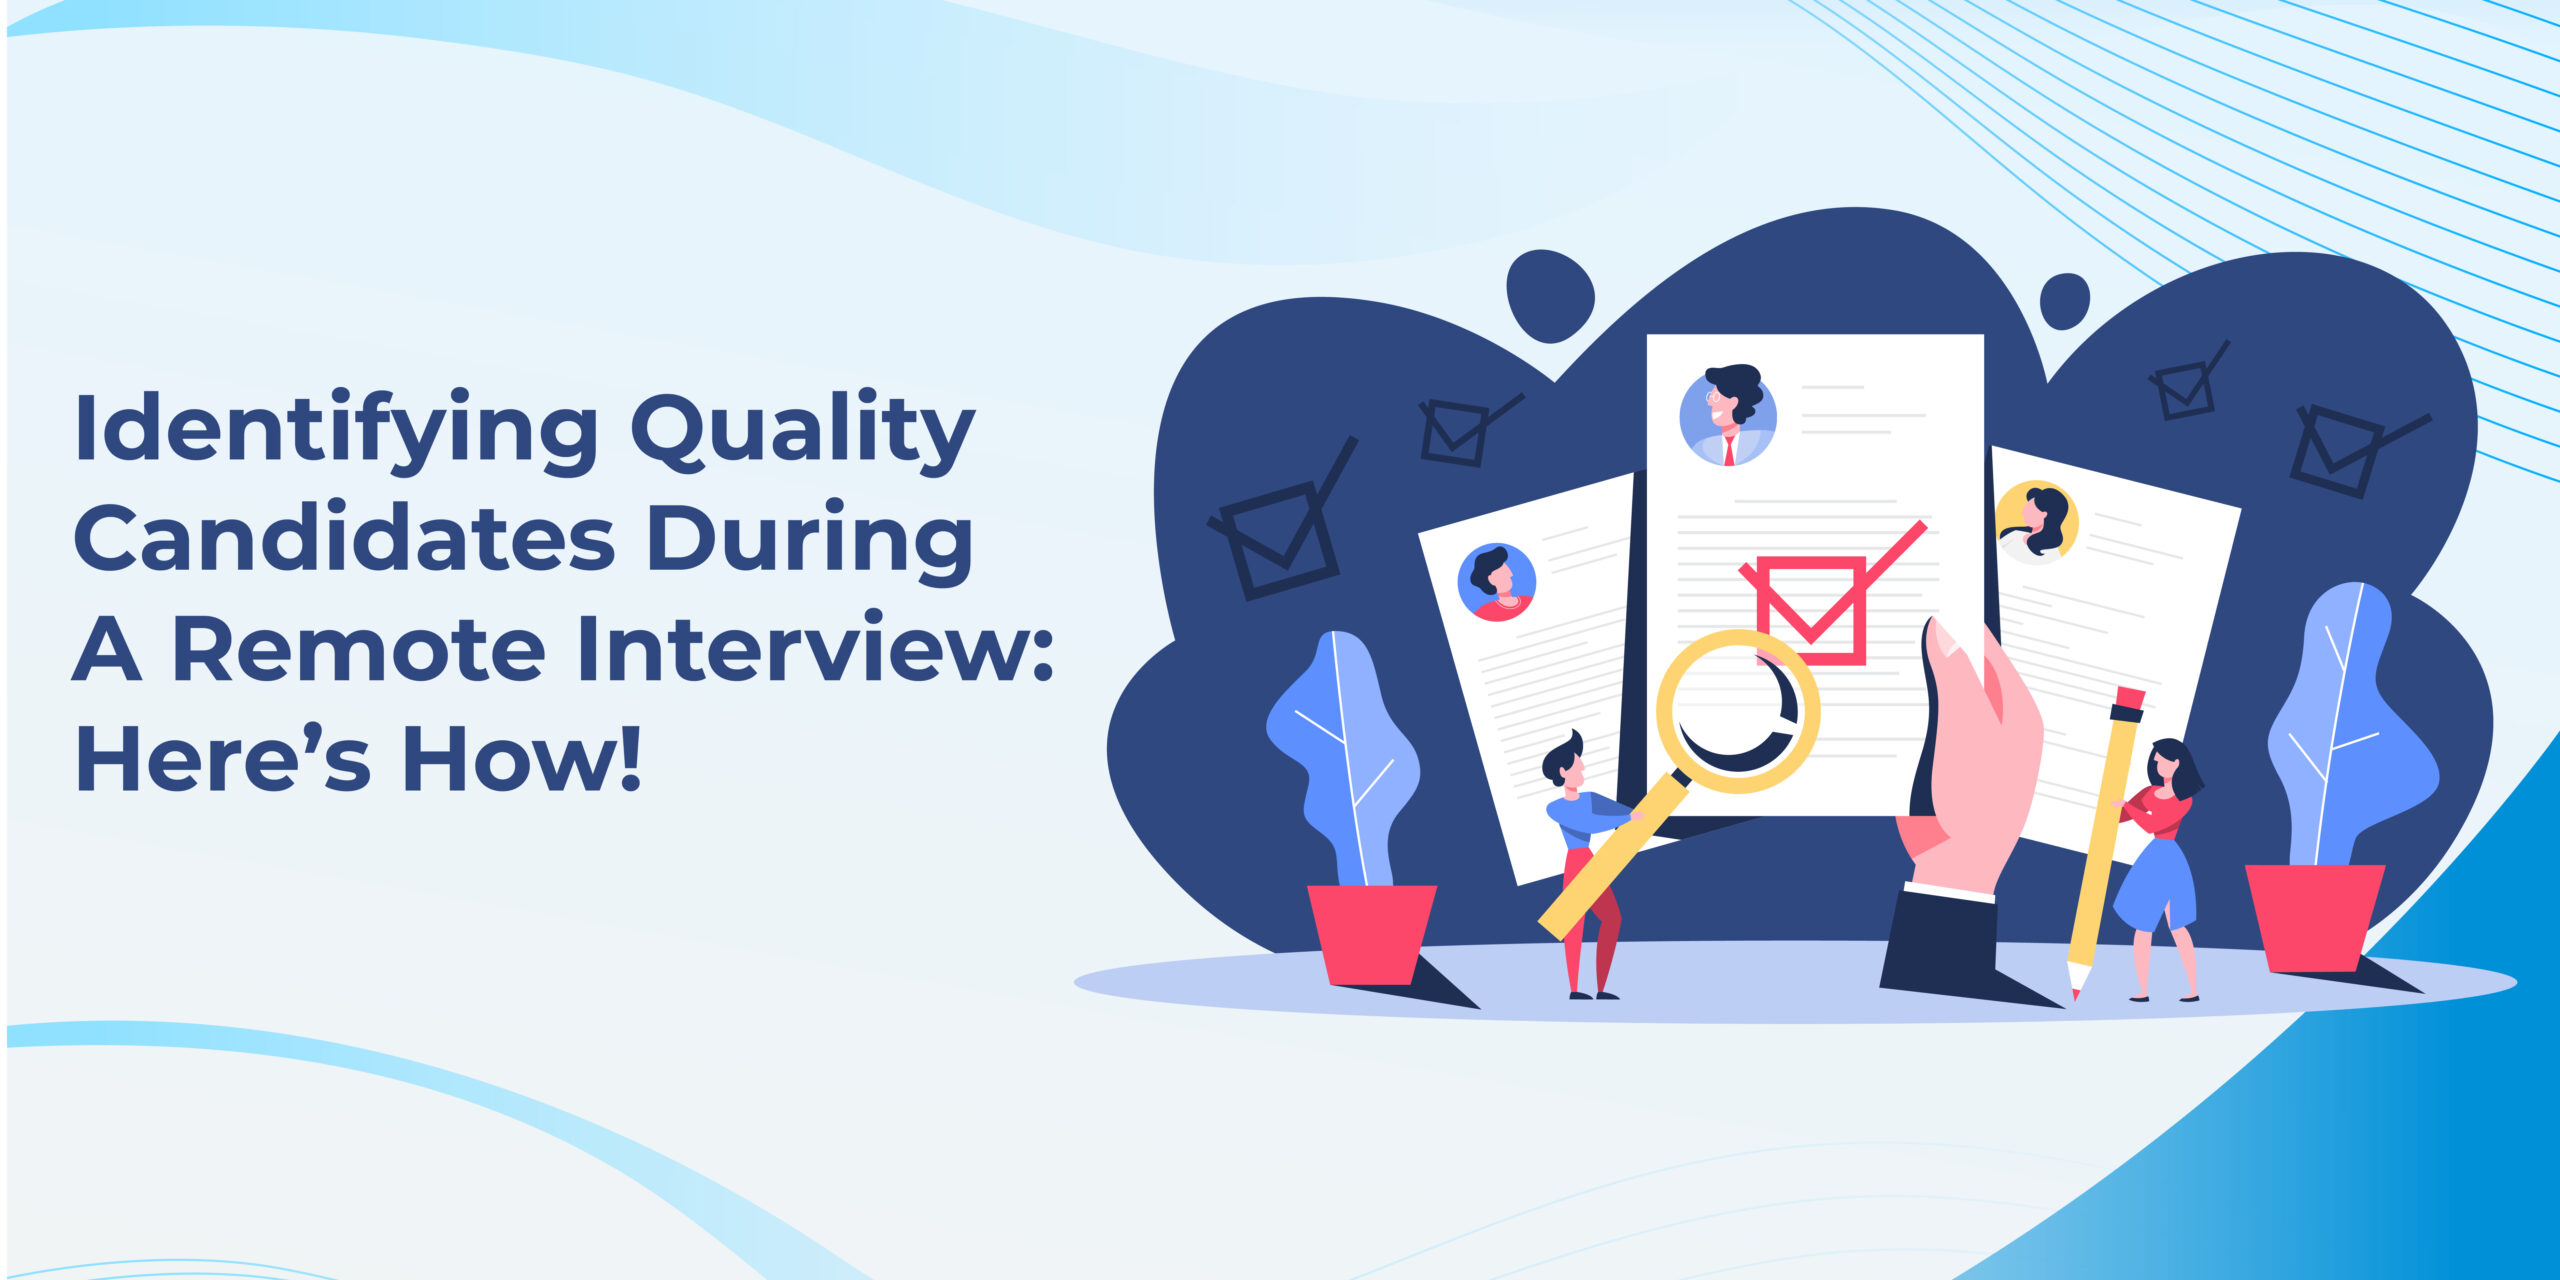 Identifying Quality Candidates During A Remote Interview: Here’s How!